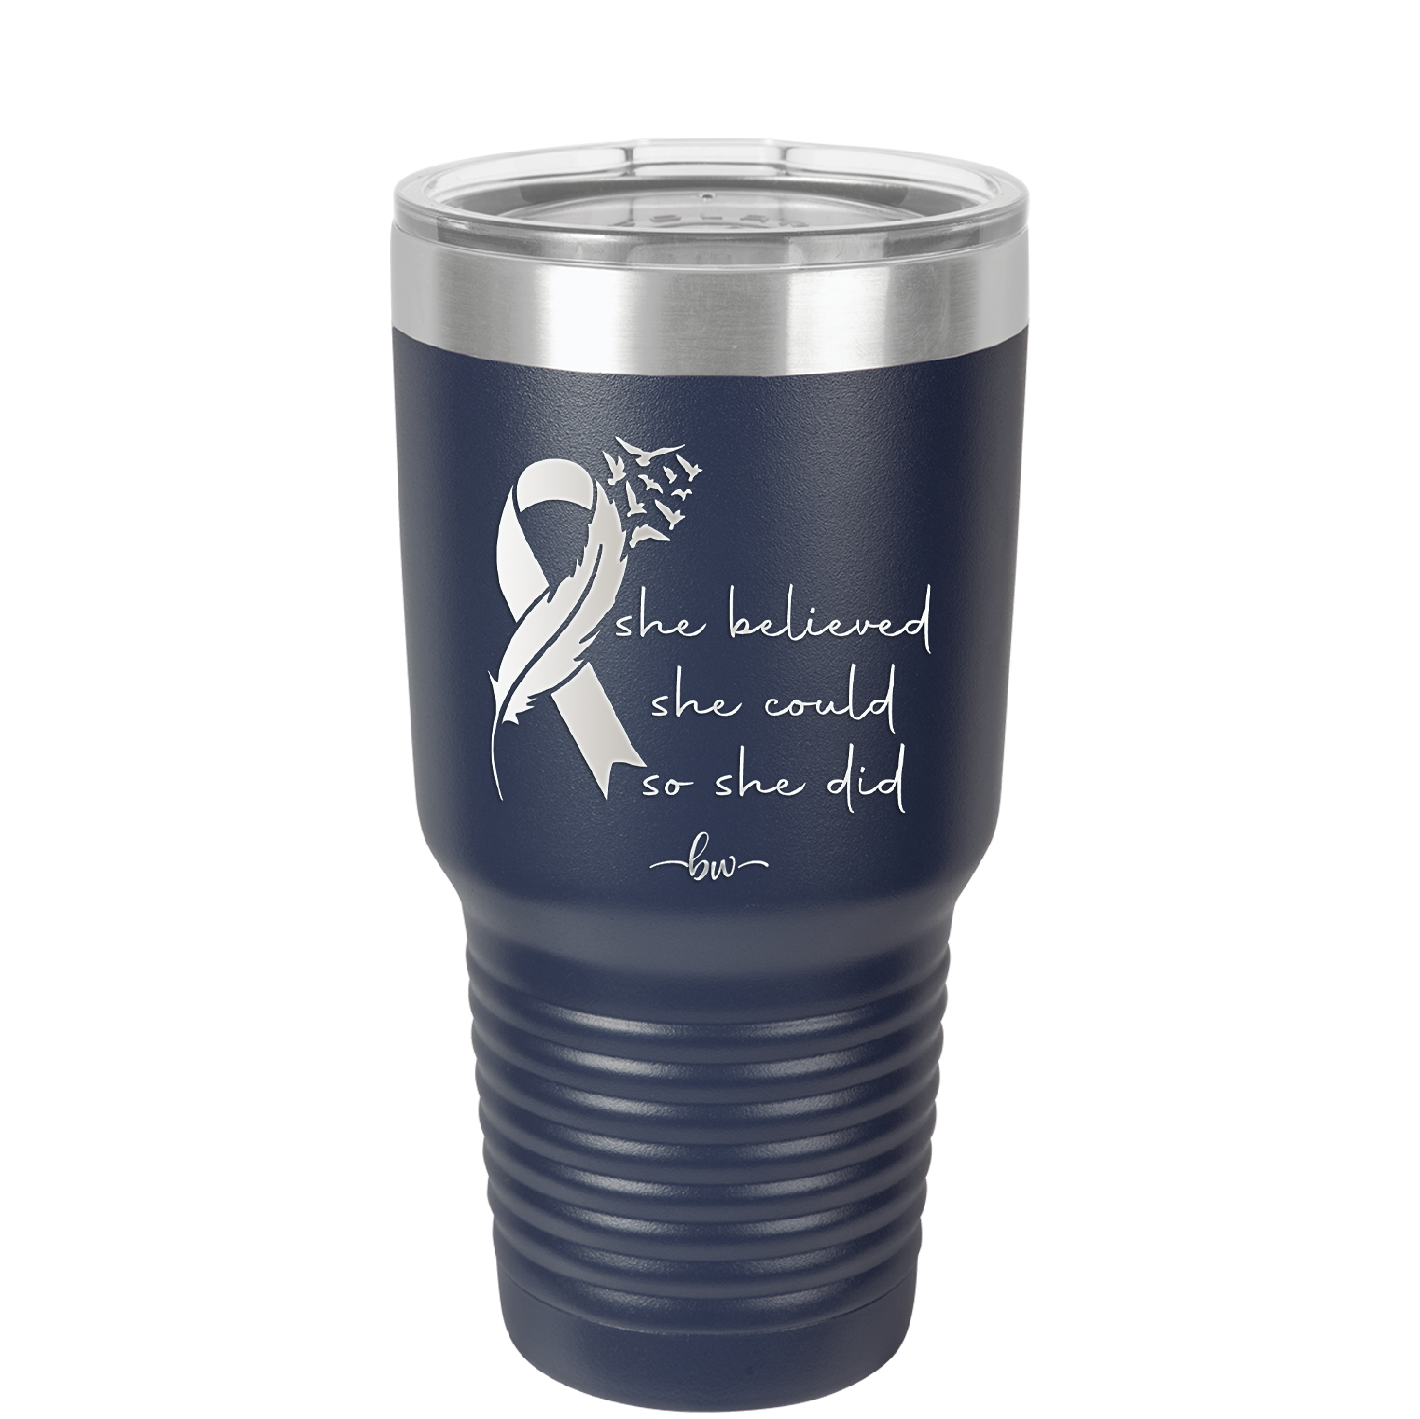 She Believed She Could So She Did Breast Cancer - Laser Engraved Stainless Steel Drinkware - 1521 -